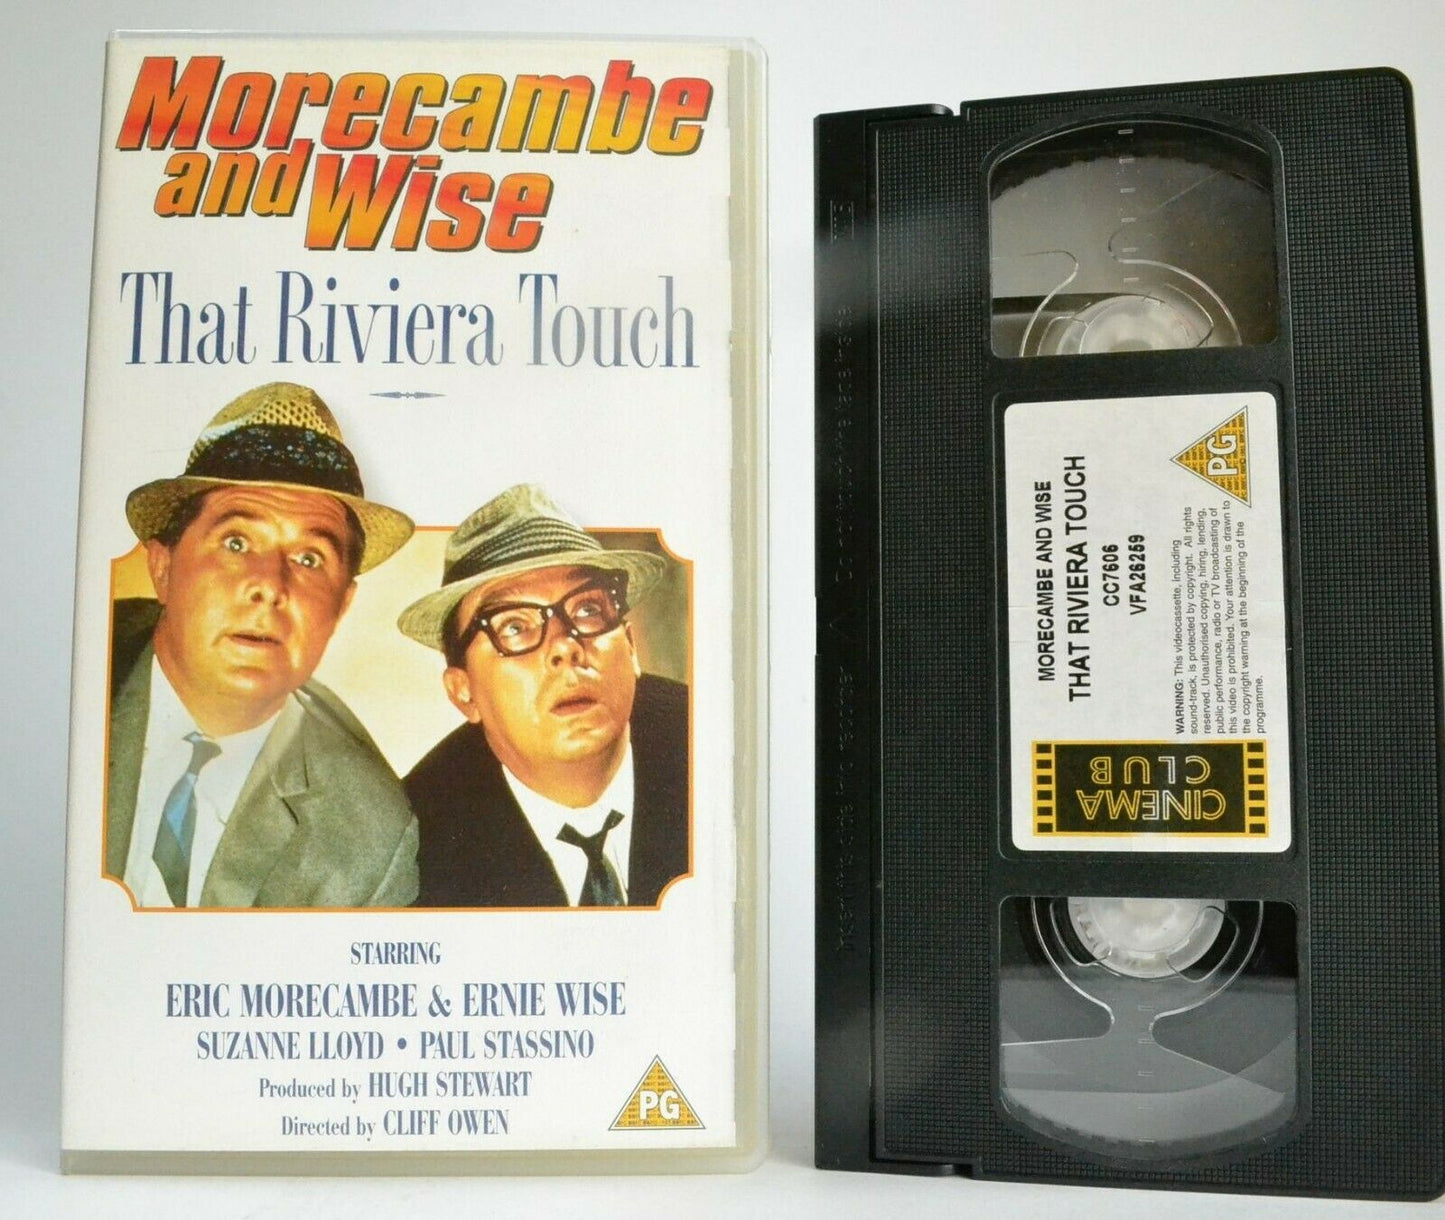 Morecambe And Wise: That Riviera Touch - (1966) Comedy -<<Cliff Owen>>- VHS-